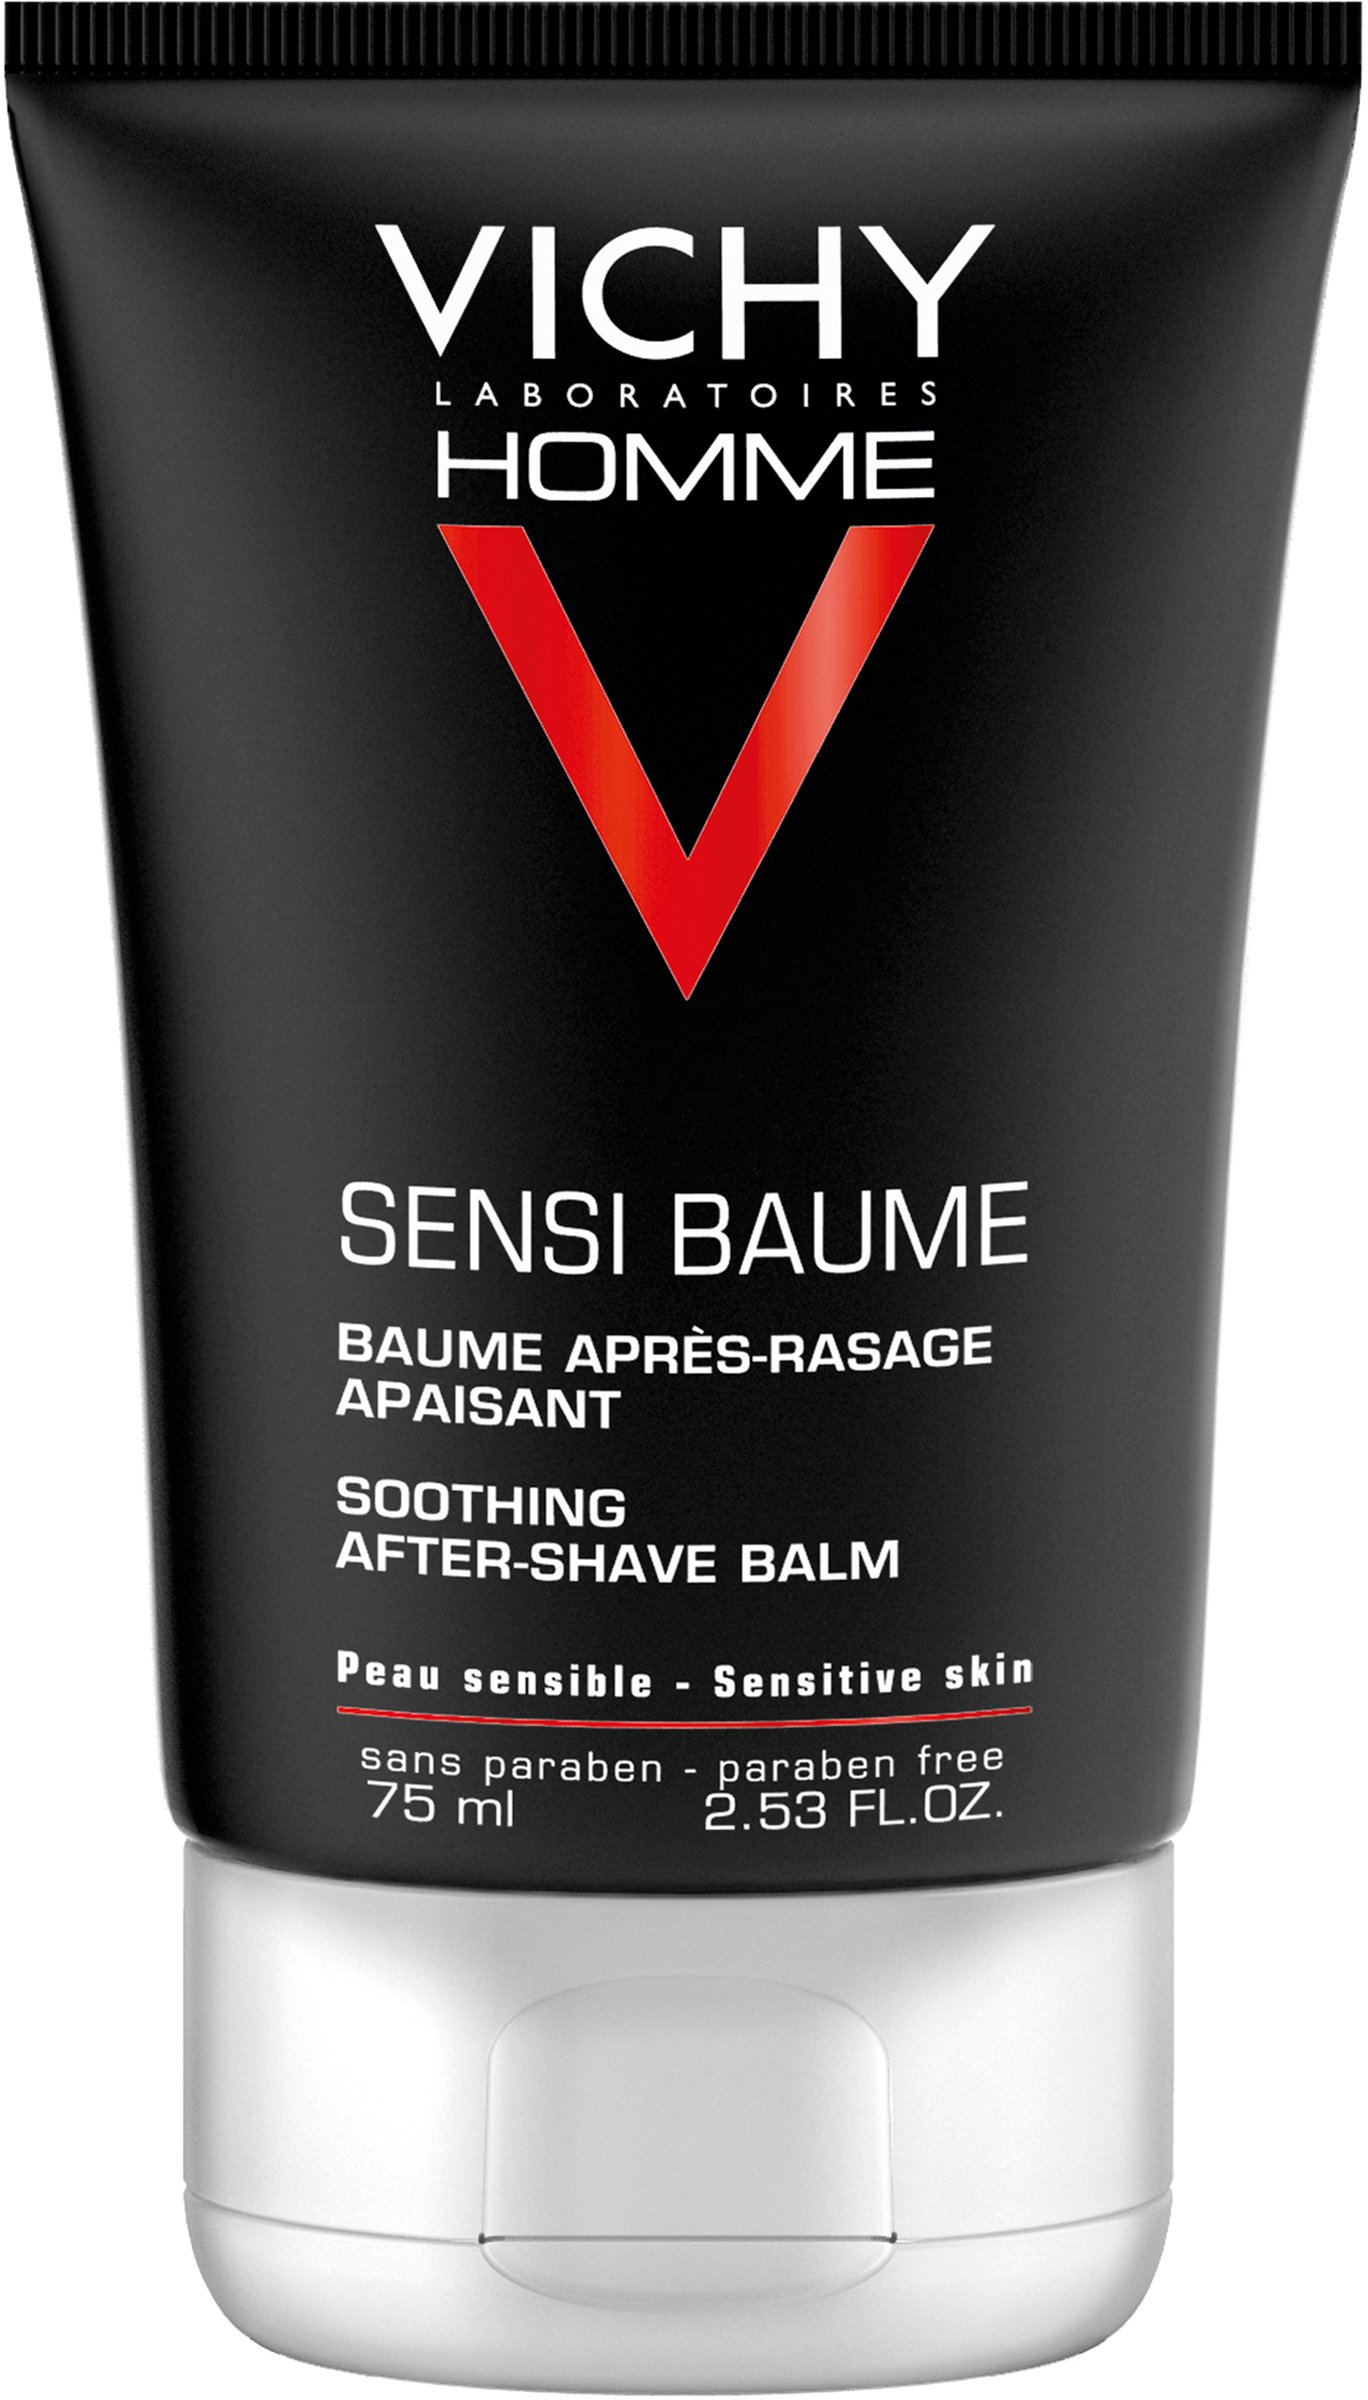 Vichy Homme Sensi-Baume Soothing After-Shave Balm 75 ml